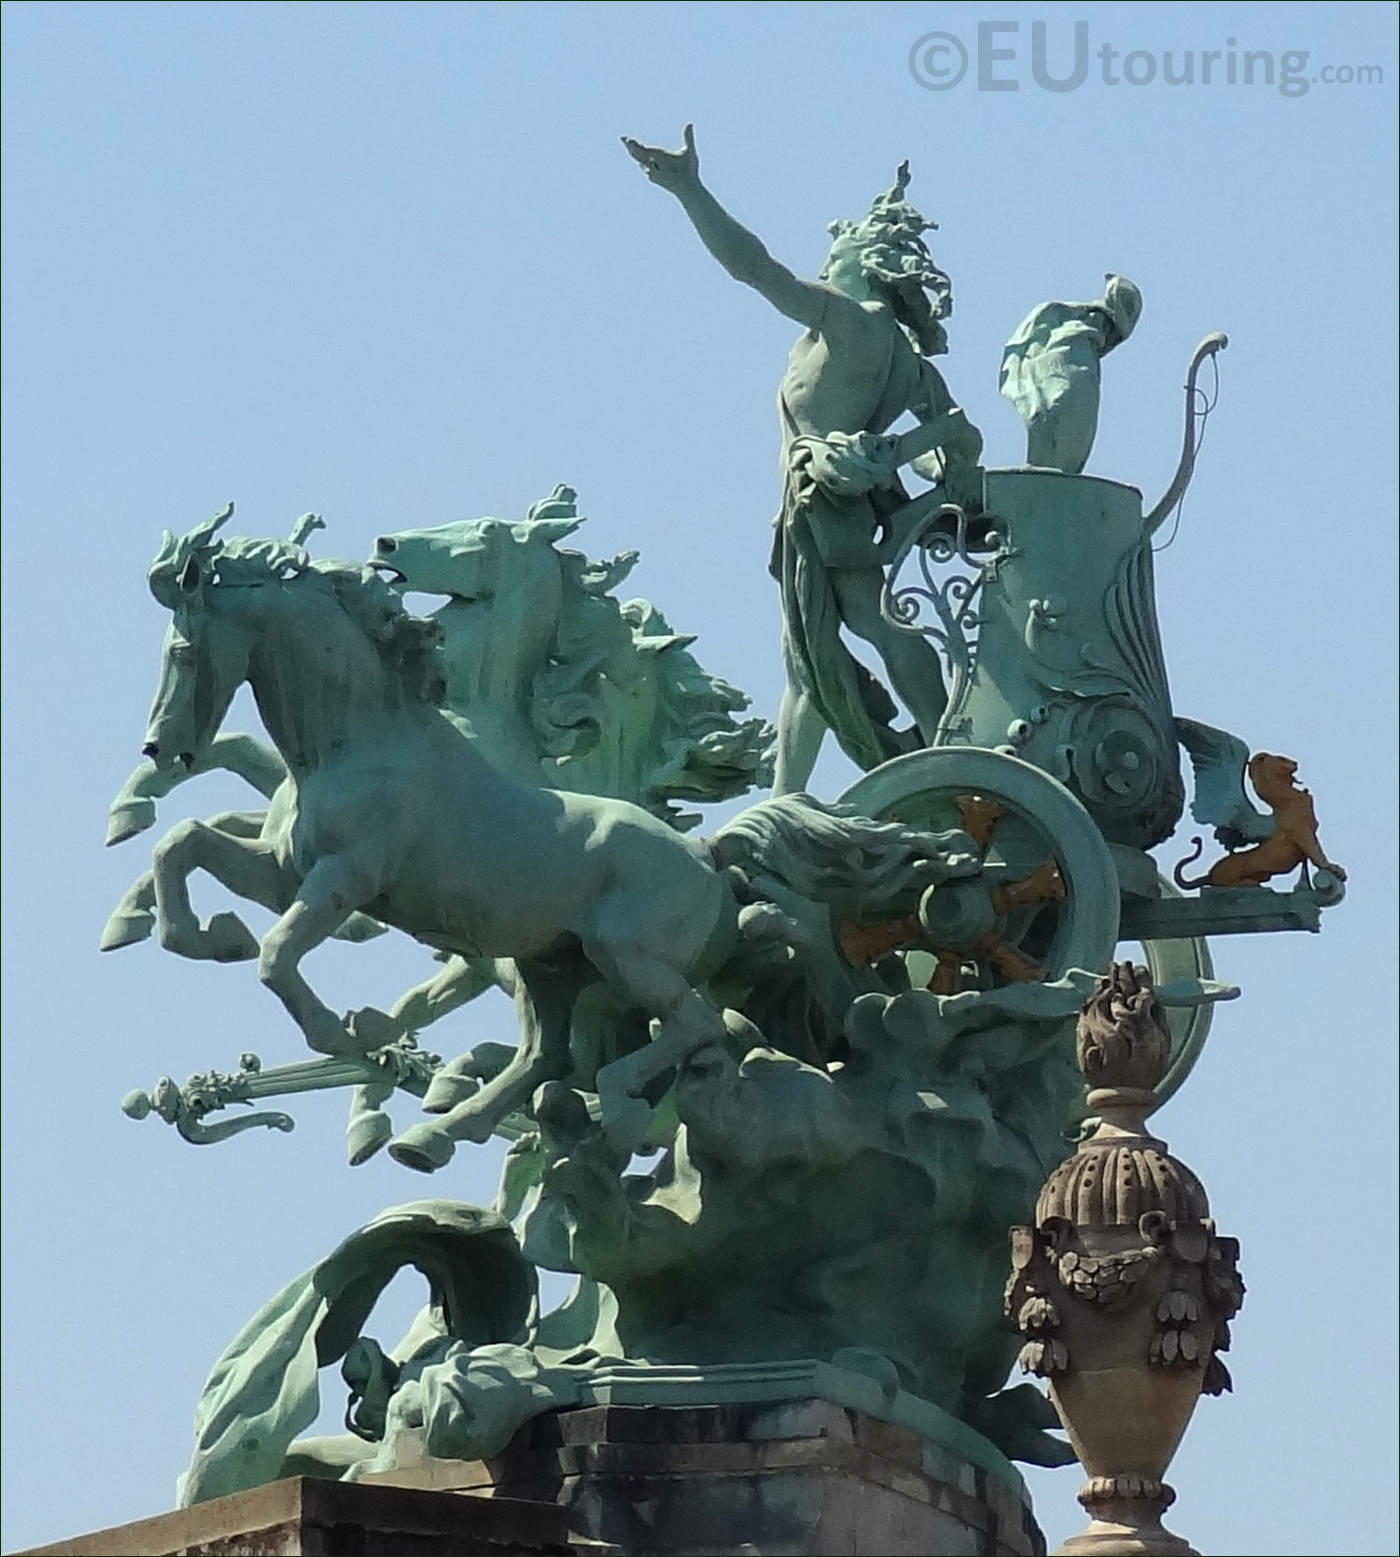 HD Photos Of Paris Statues And Sculptures With Location Map